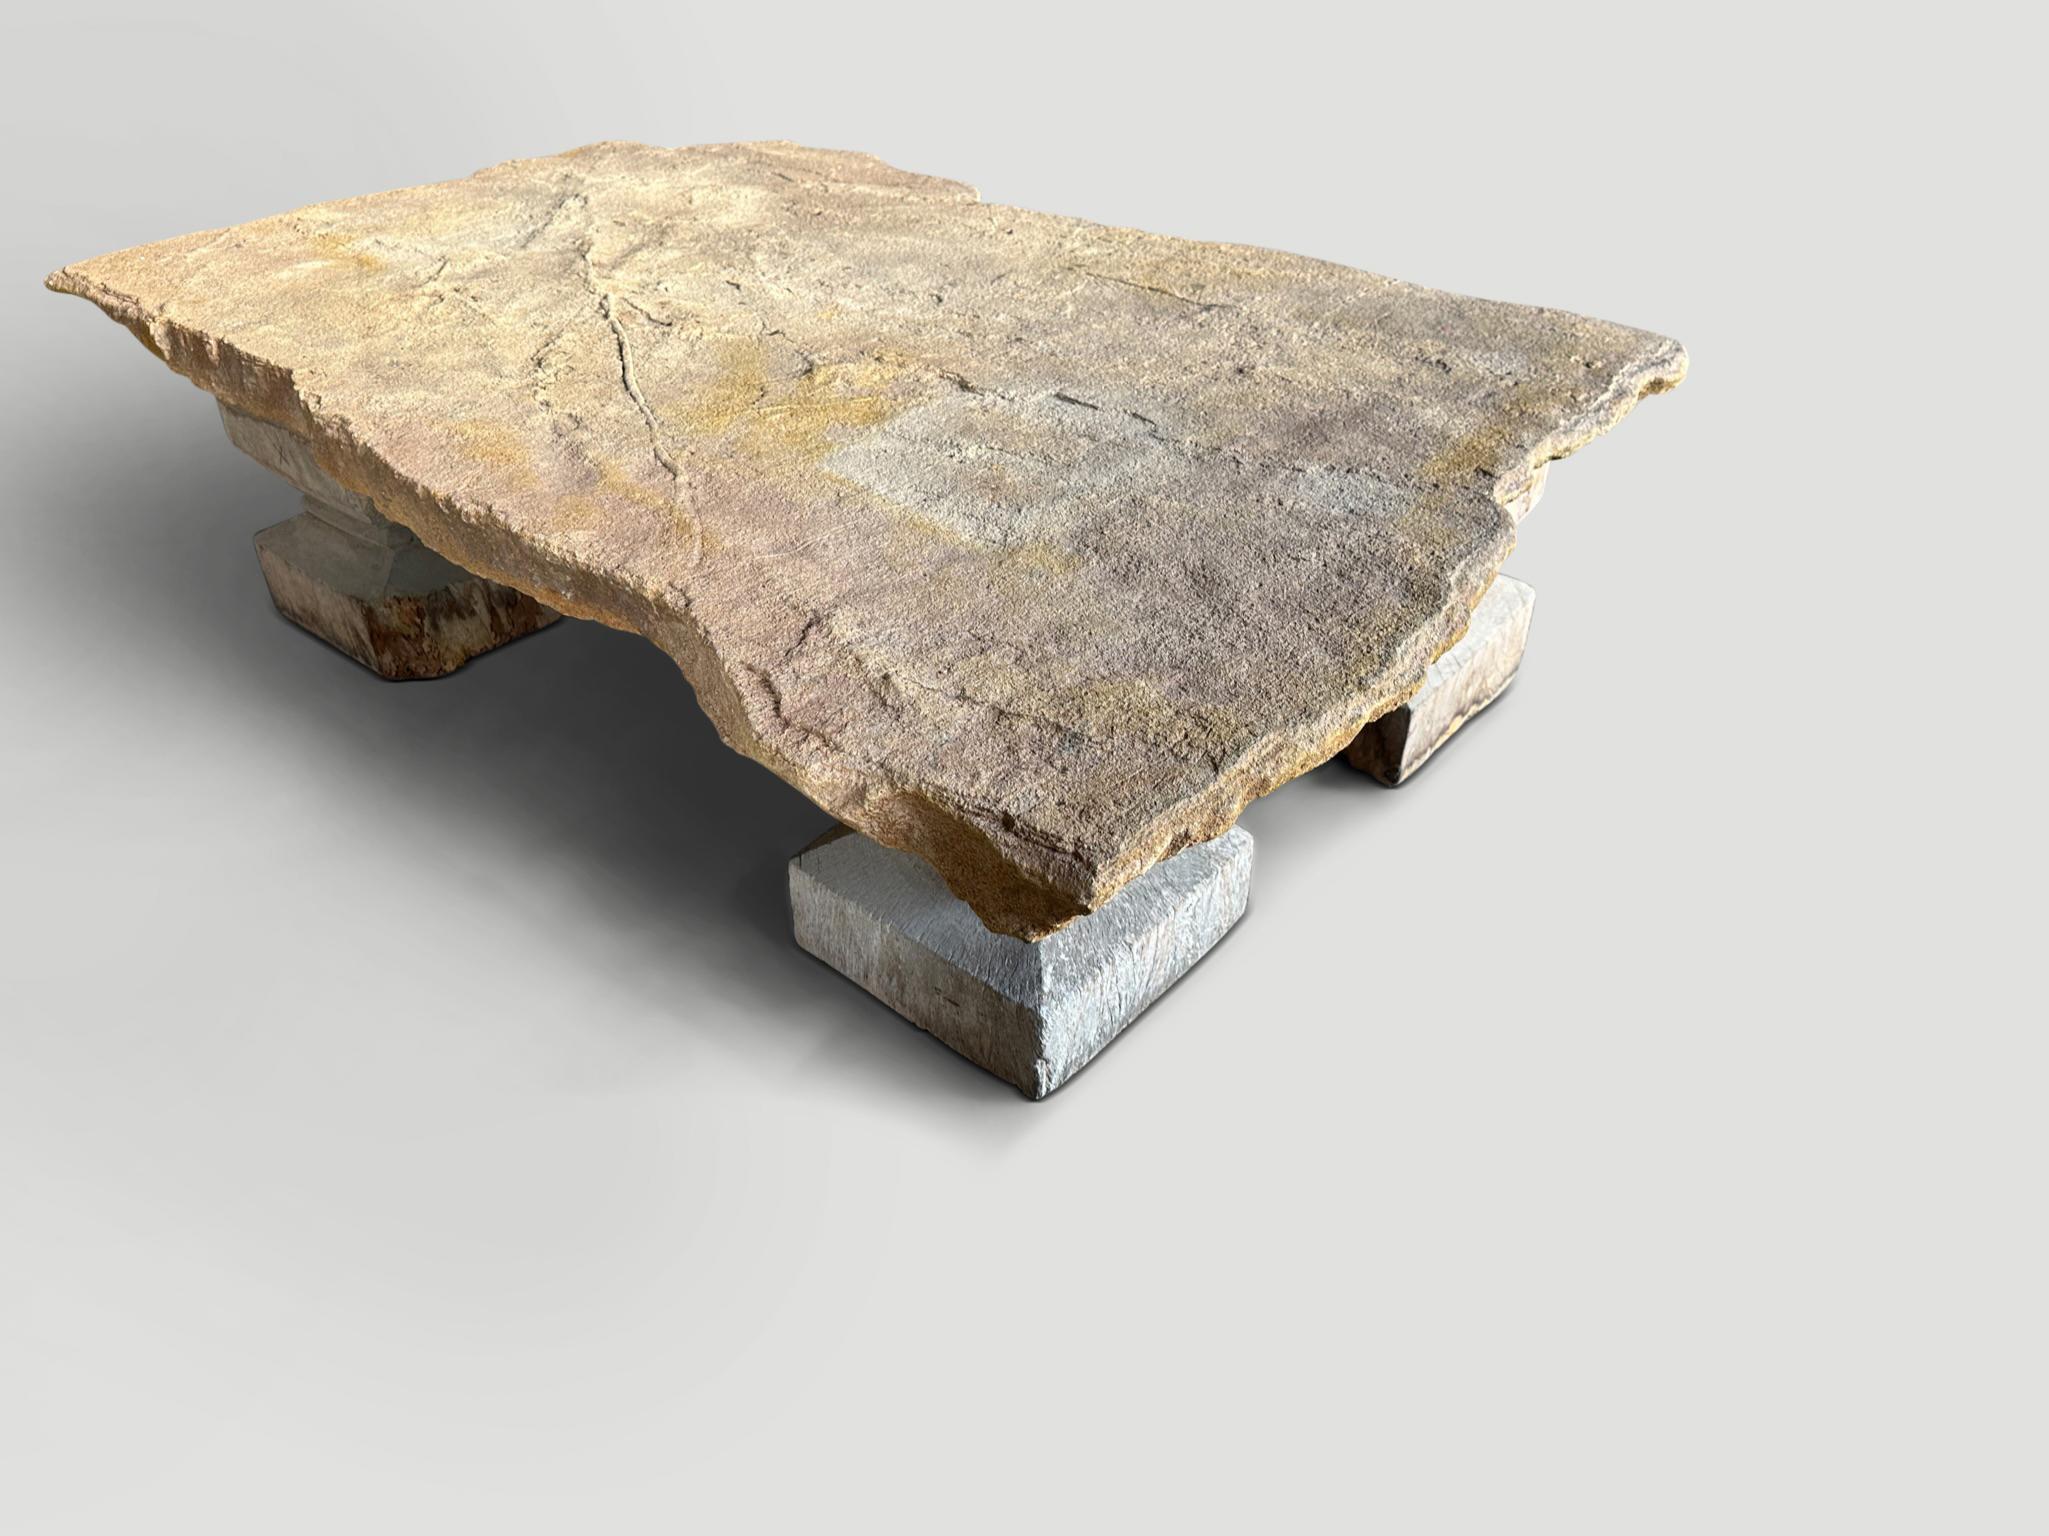 Andrianna Shamaris Antique Sumba Stone Coffee Table  In Excellent Condition For Sale In New York, NY